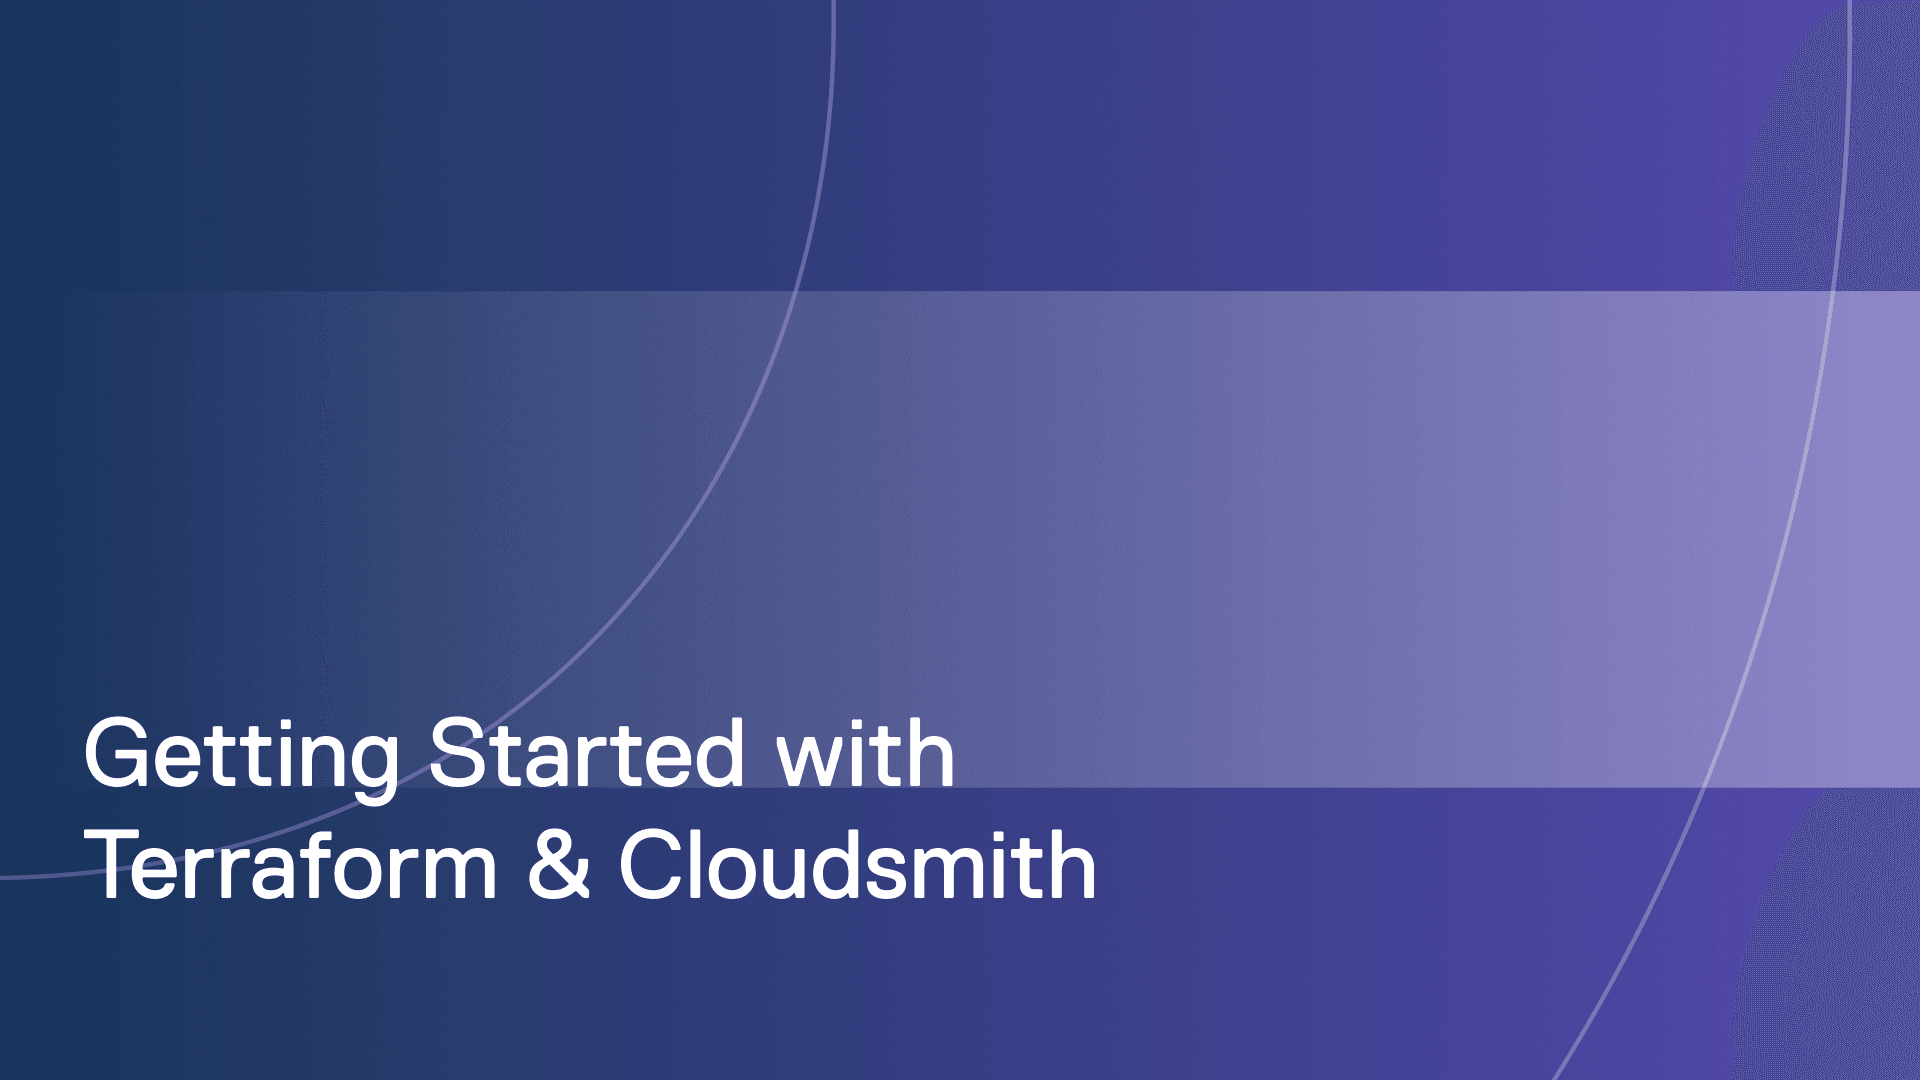 Getting started with Terraform Modules and Cloudsmith